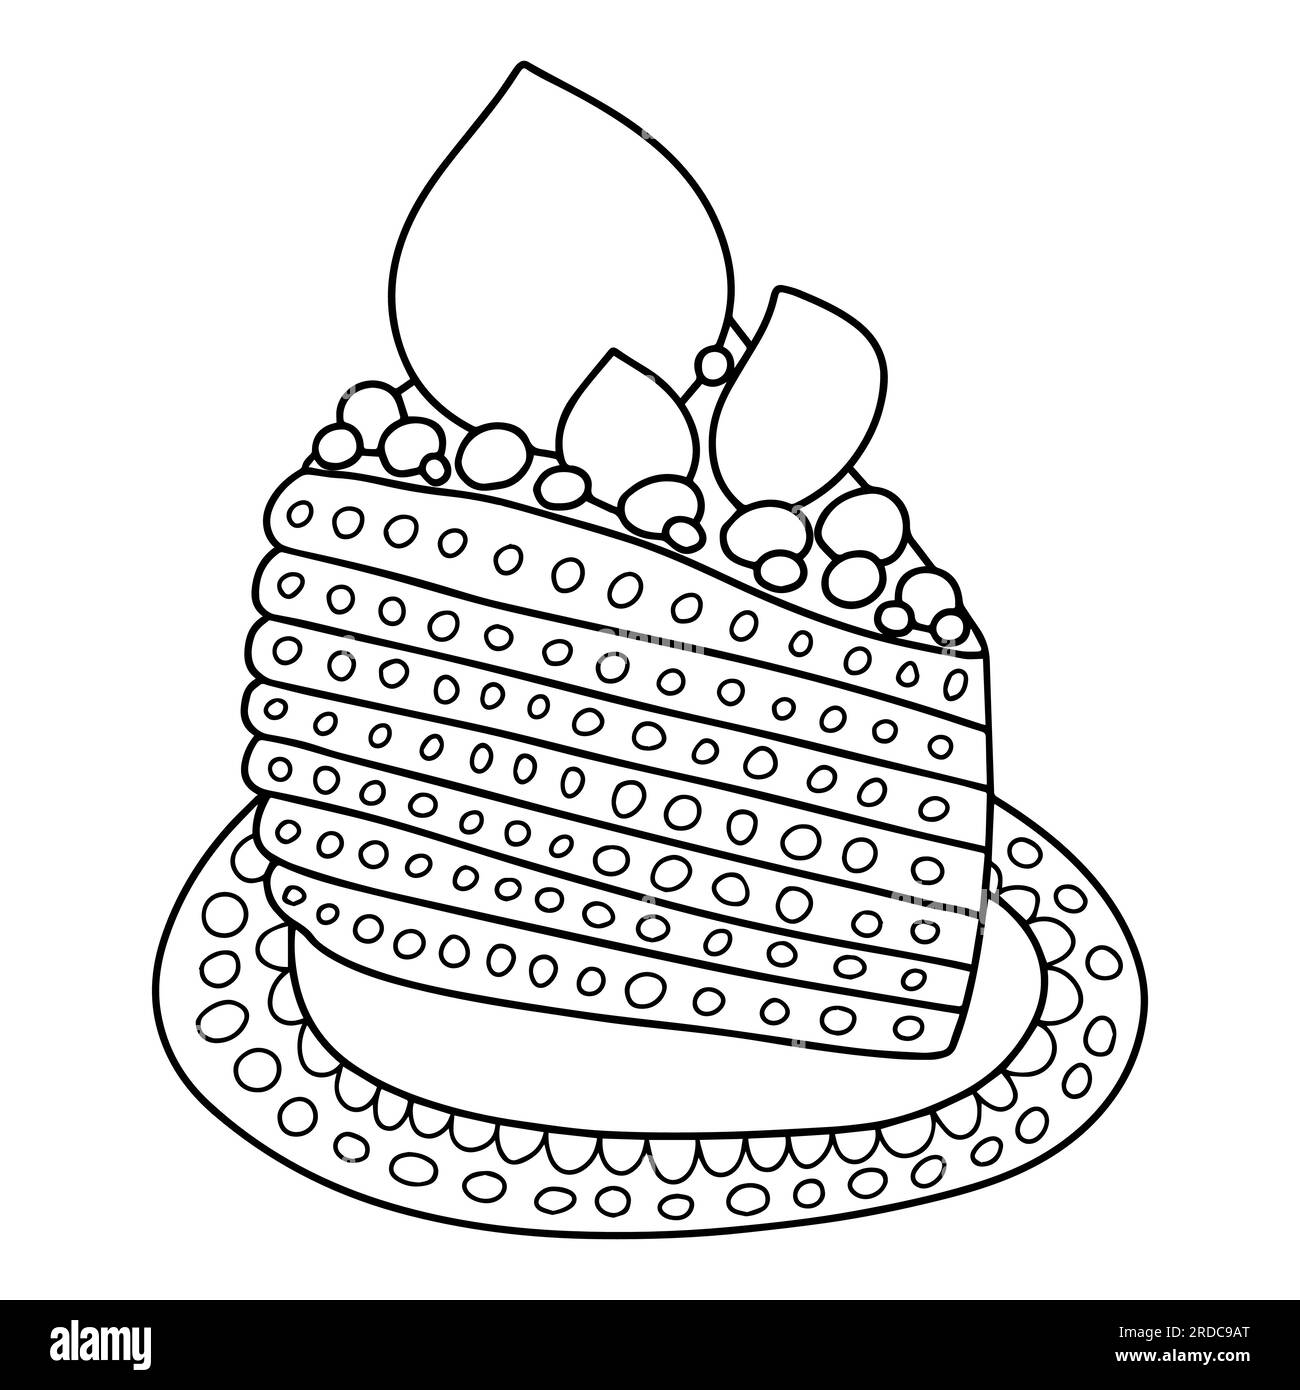 Slice of cake on plate Stock Vector